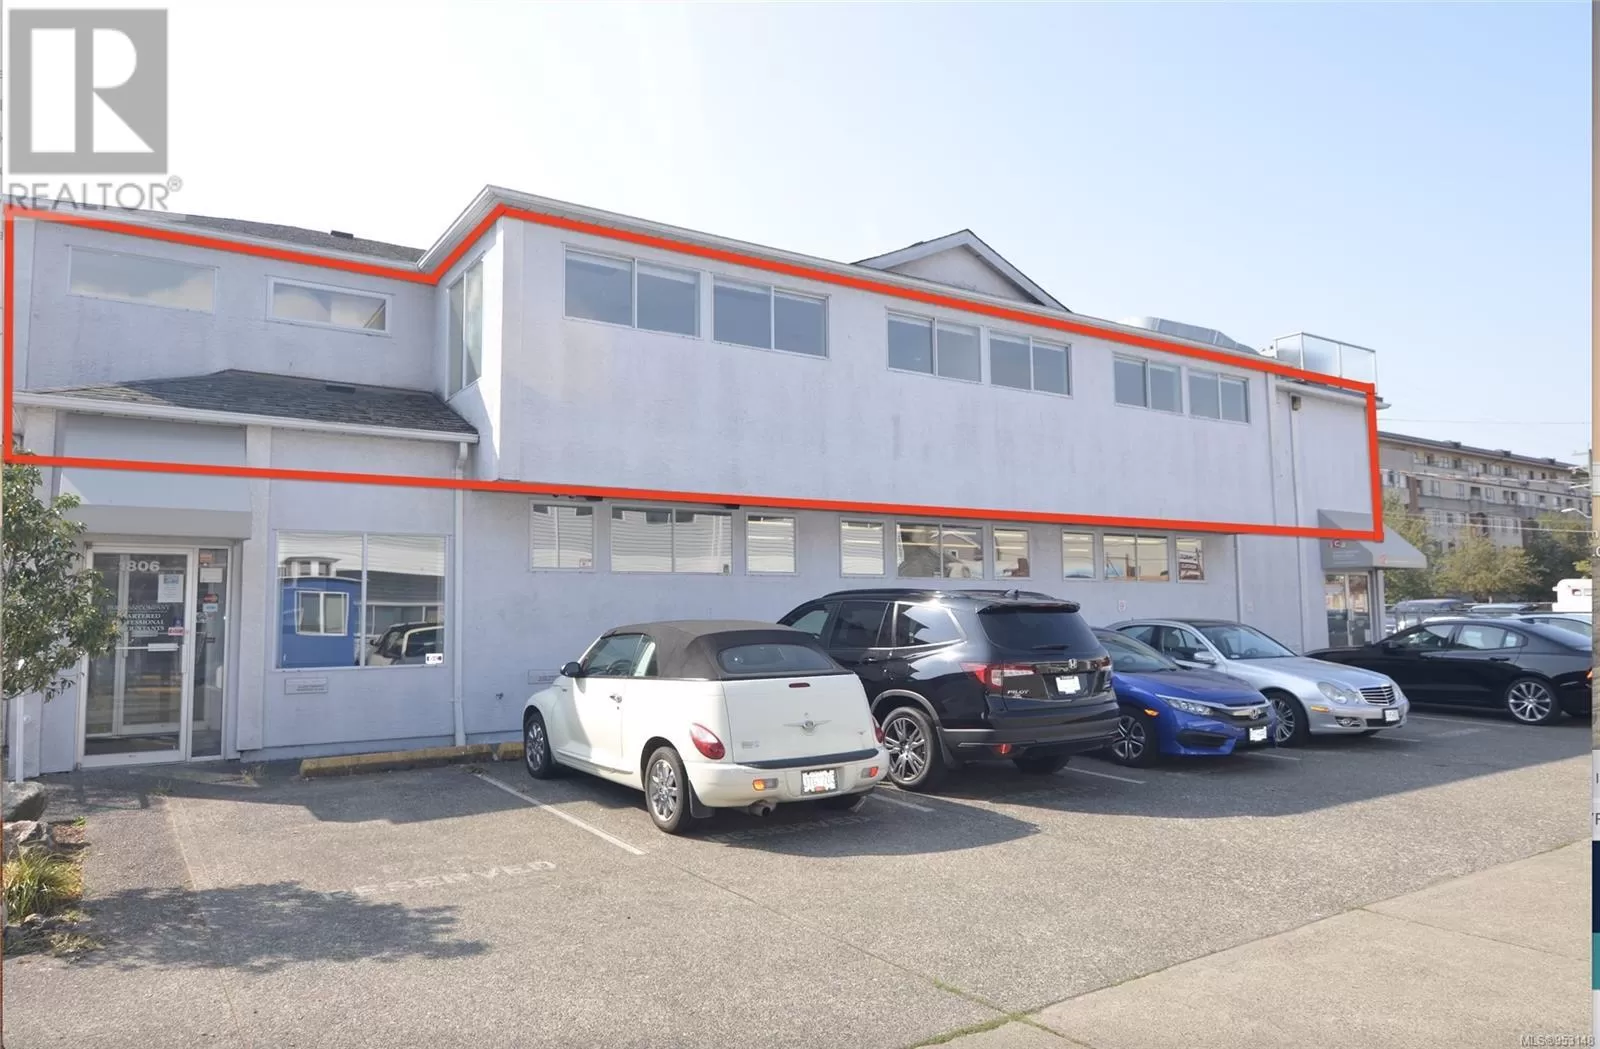 Offices for rent: 1806 Vancouver St, Victoria, British Columbia V8T 5E3